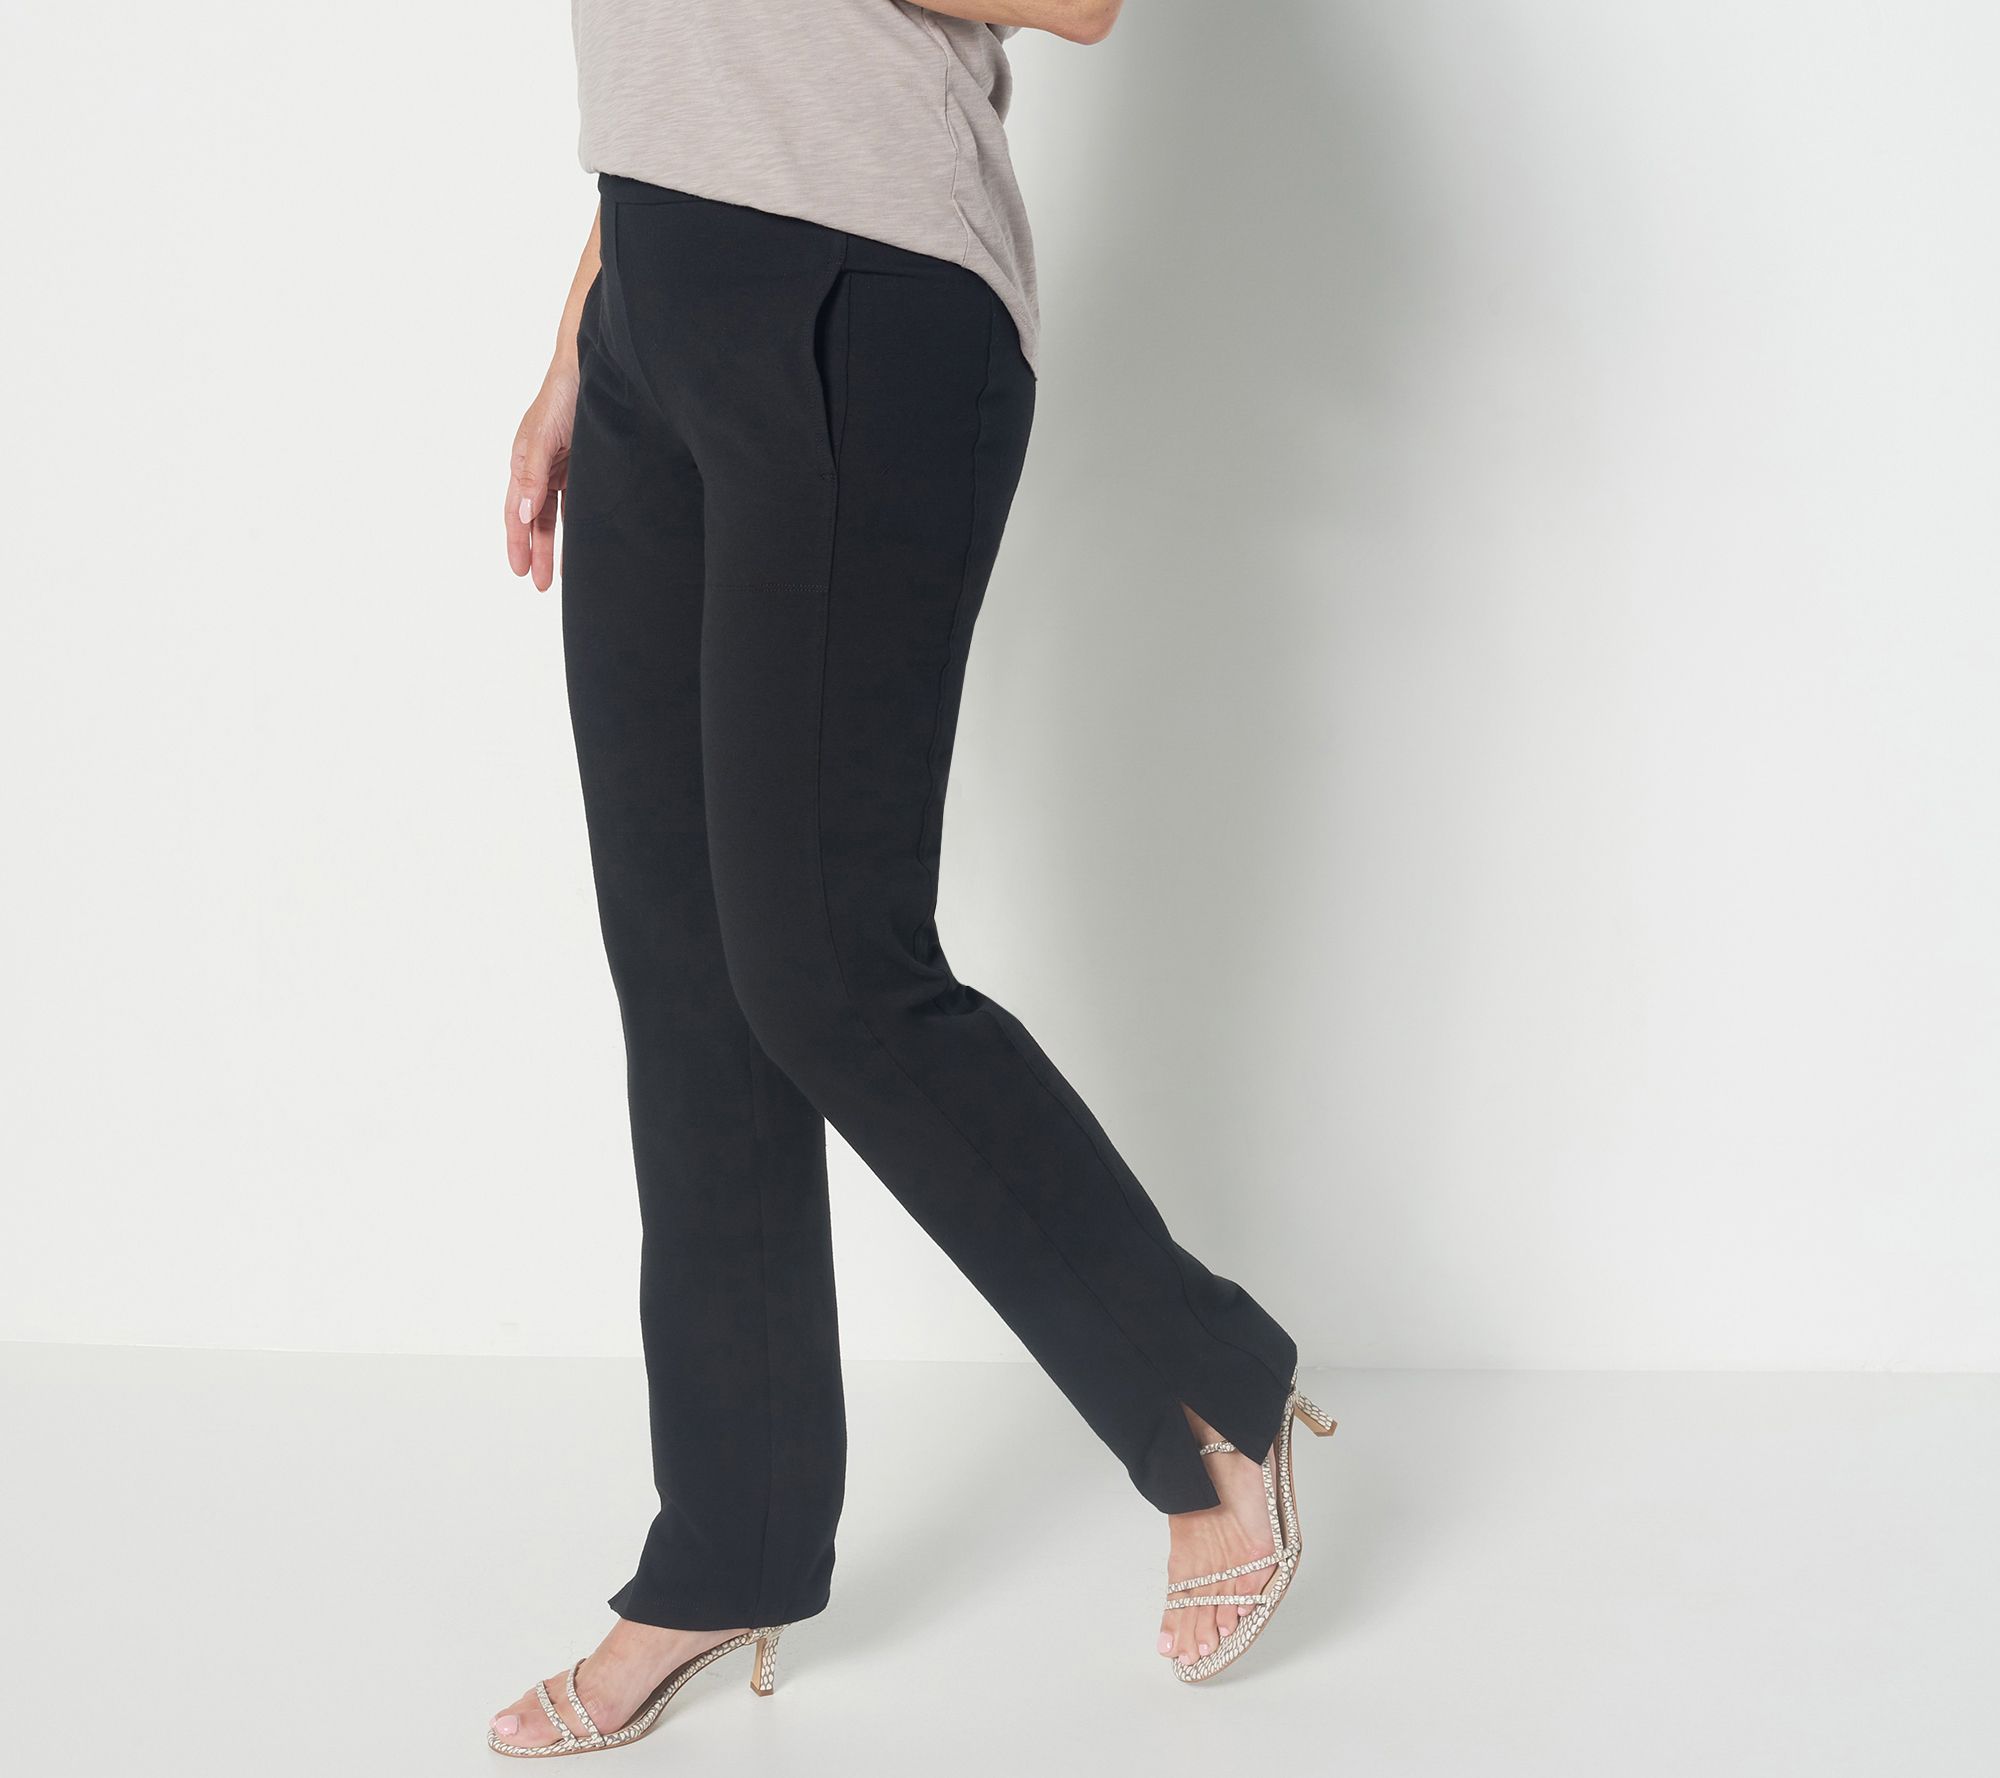 Women with Control Tall Prime Stretch Denim Leggings with Pockets 